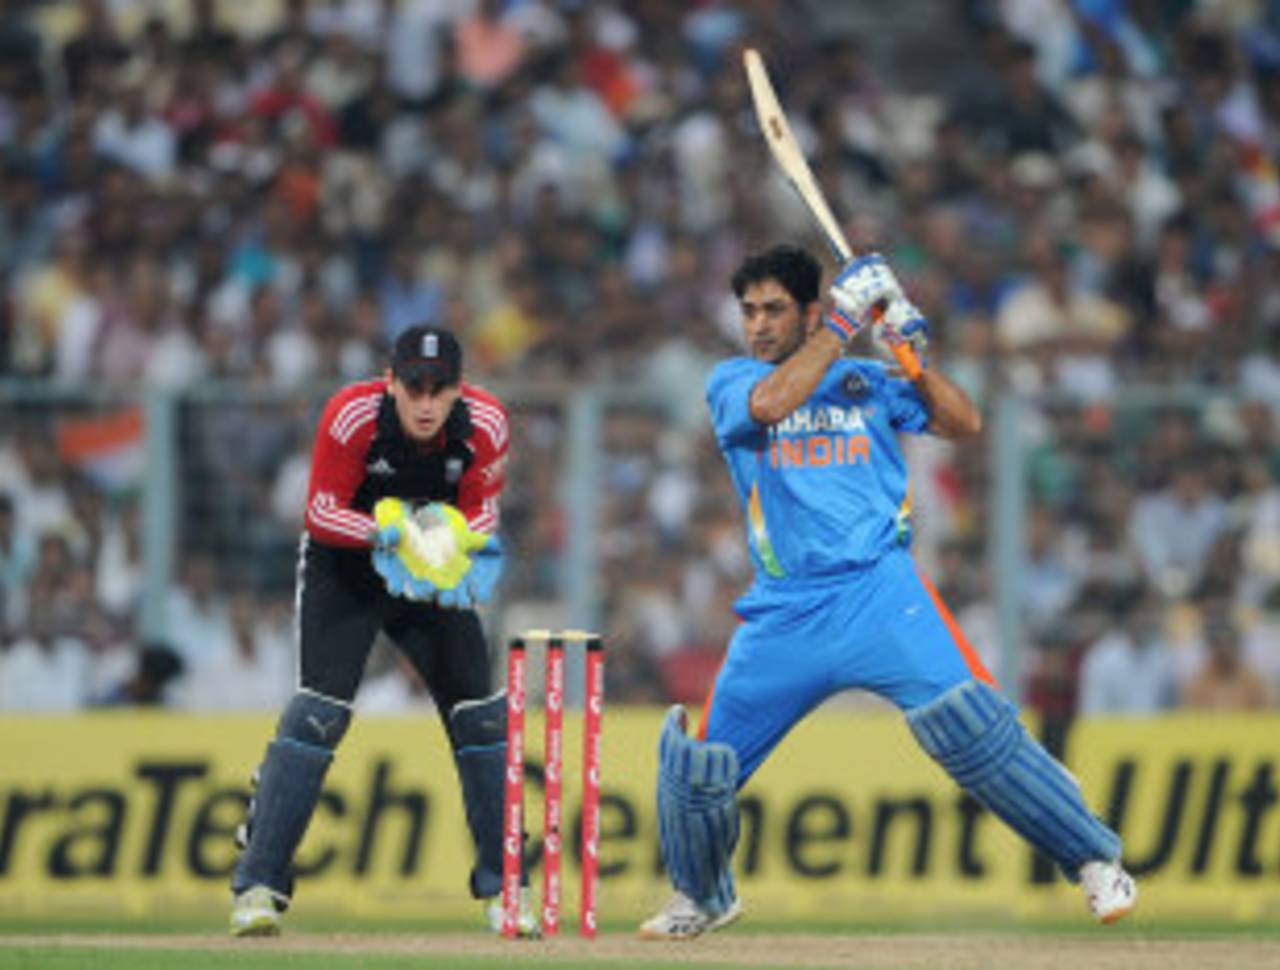 MS Dhoni drives through the off side, India v England, 5th ODI, Eden Gardens, October 25 2011